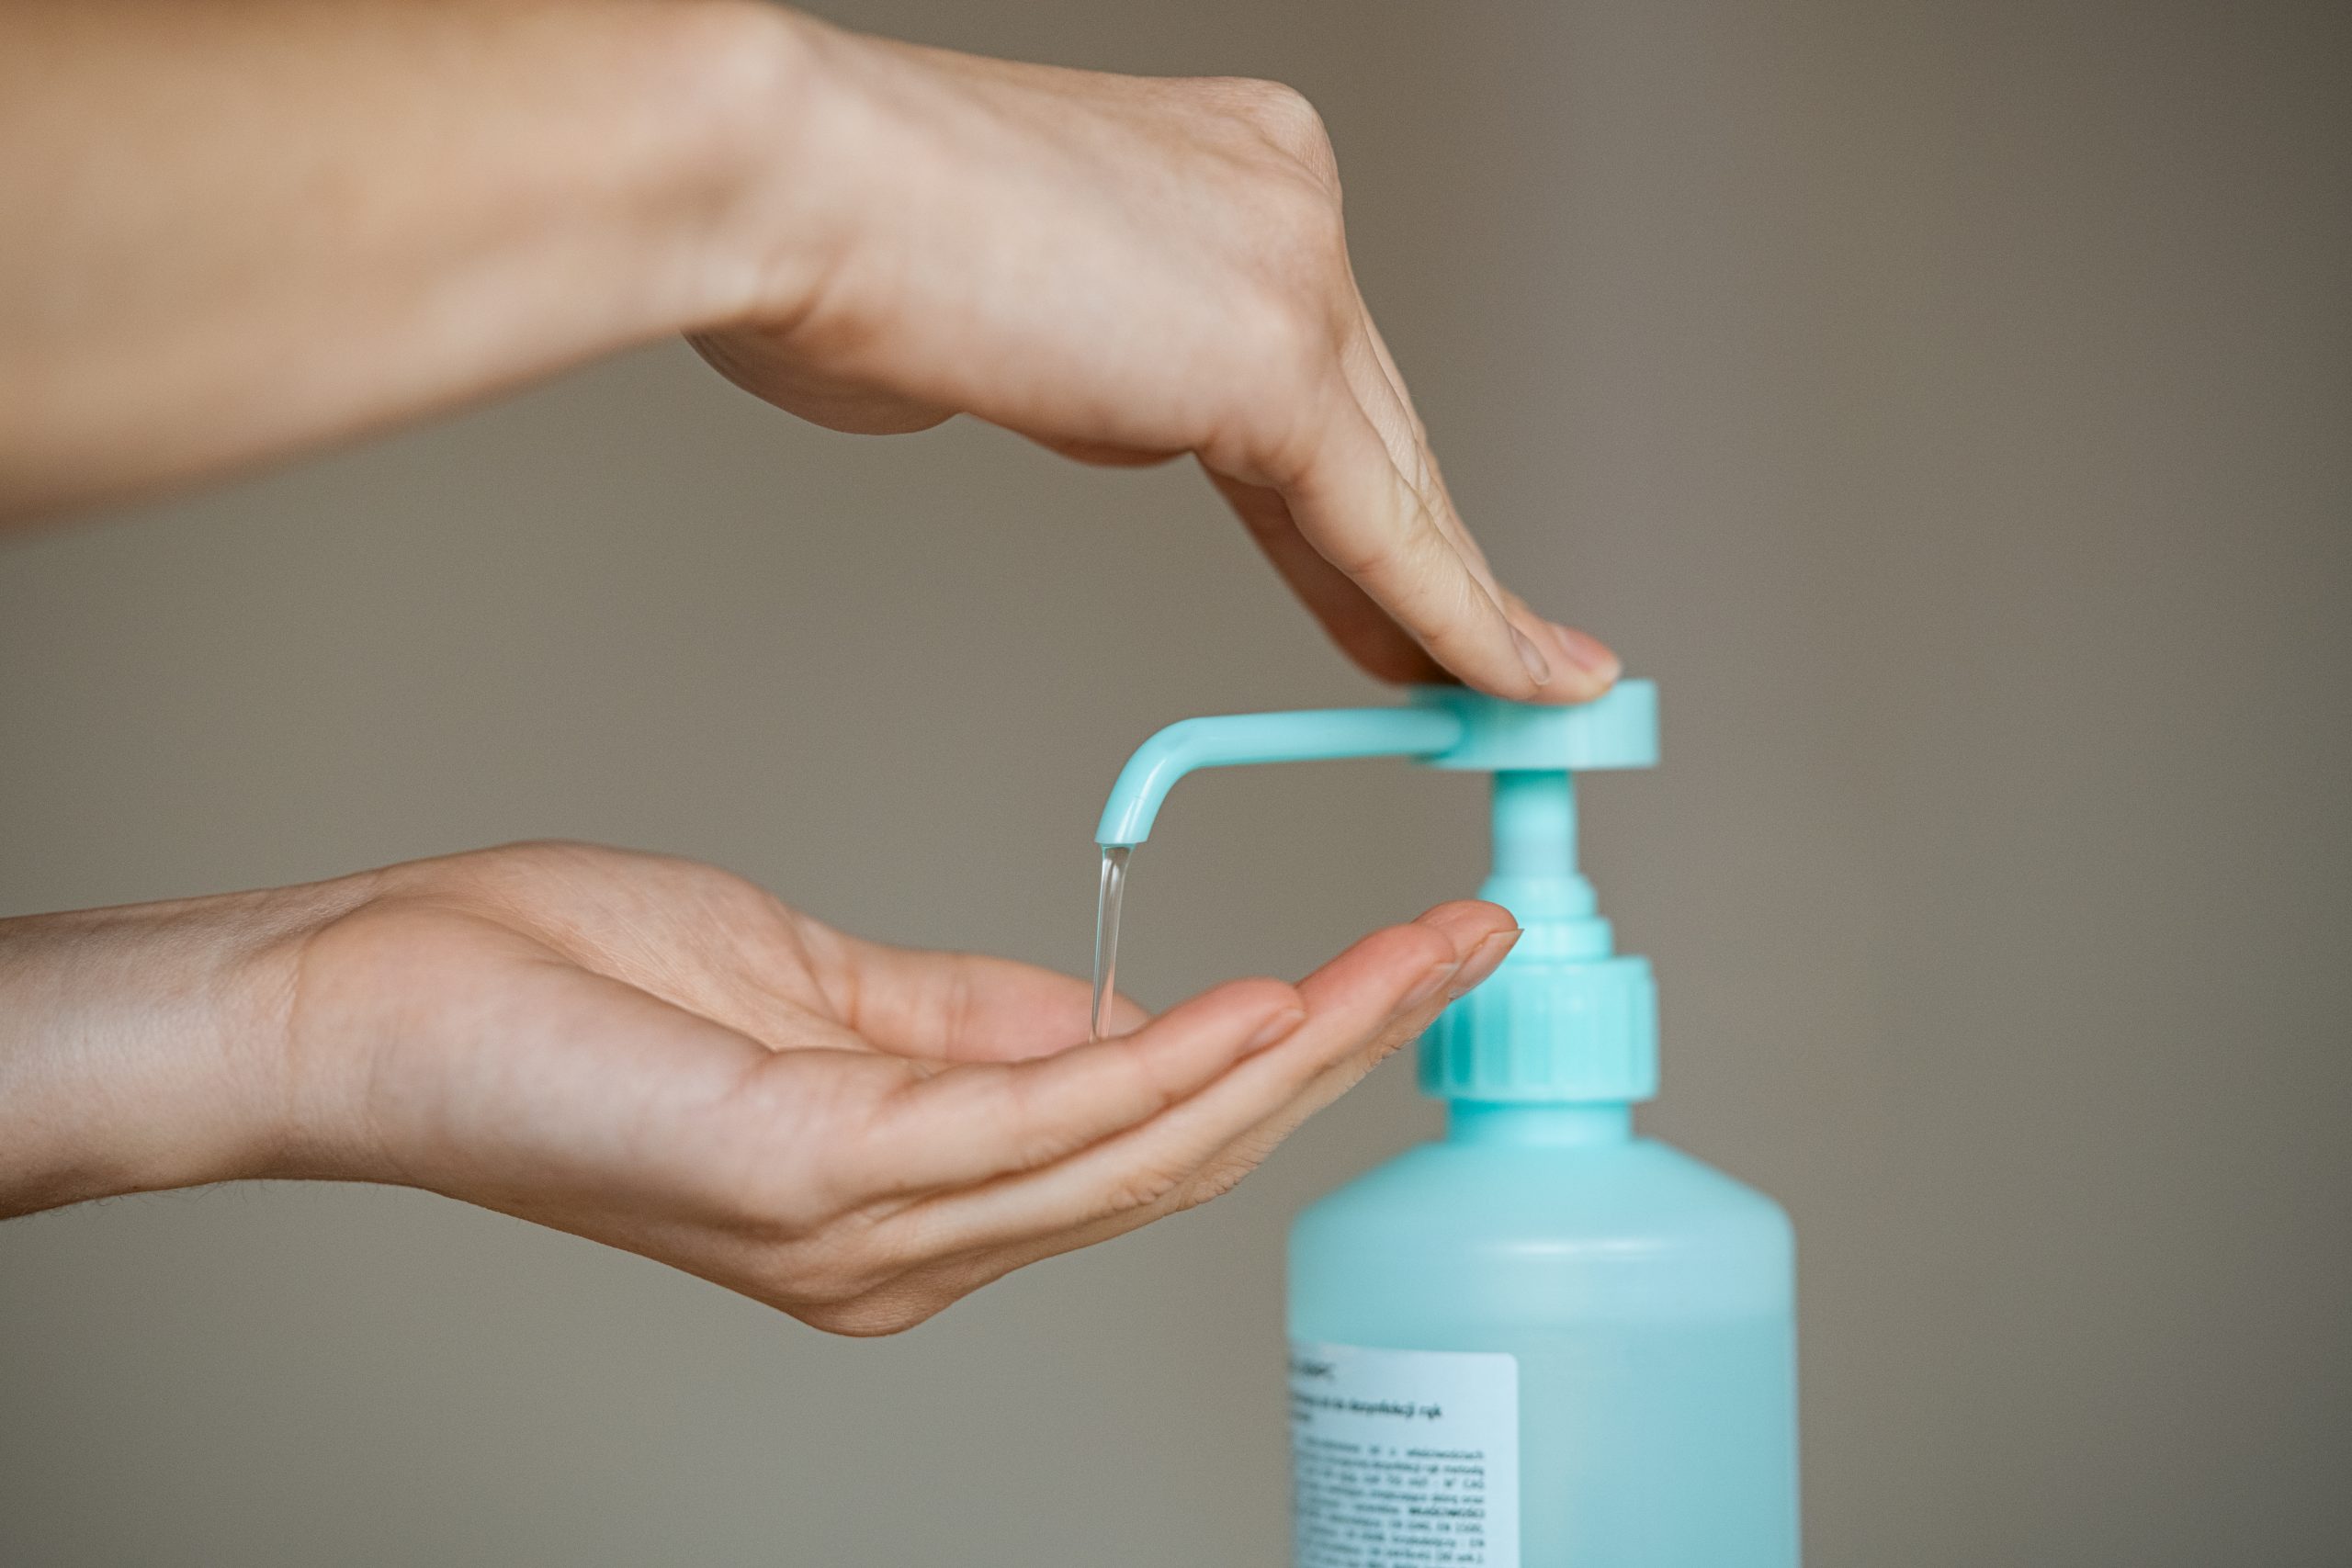 Close up of sanitizer gel pump dispenser for hand hygiene, virus and germs protection. Woman hands squeezing antibacterial and antiseptic hand sanitizer on hands. Prevent the spread of germs and bacteria and avoid infections corona virus.